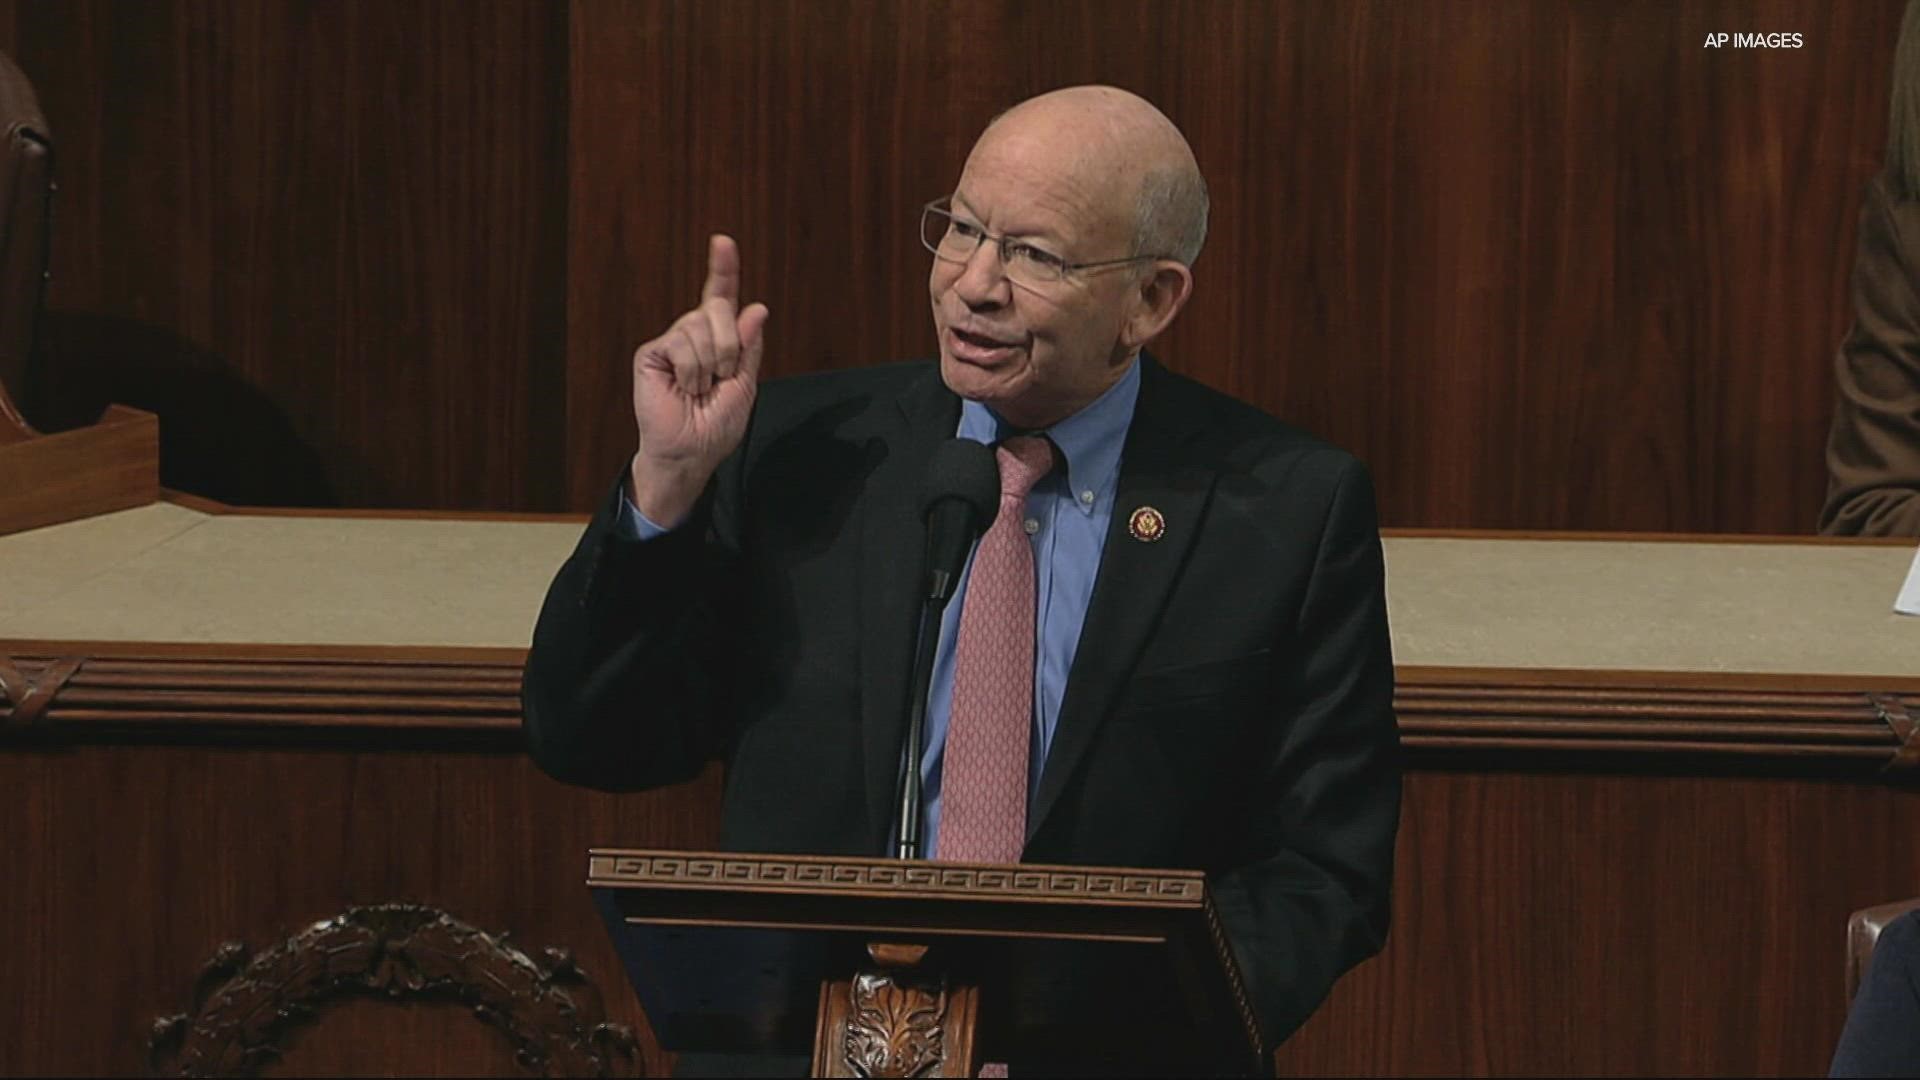 DeFazio, Oregon's longest-serving House member, said he is retiring and will not be seeking reelection in 2022.